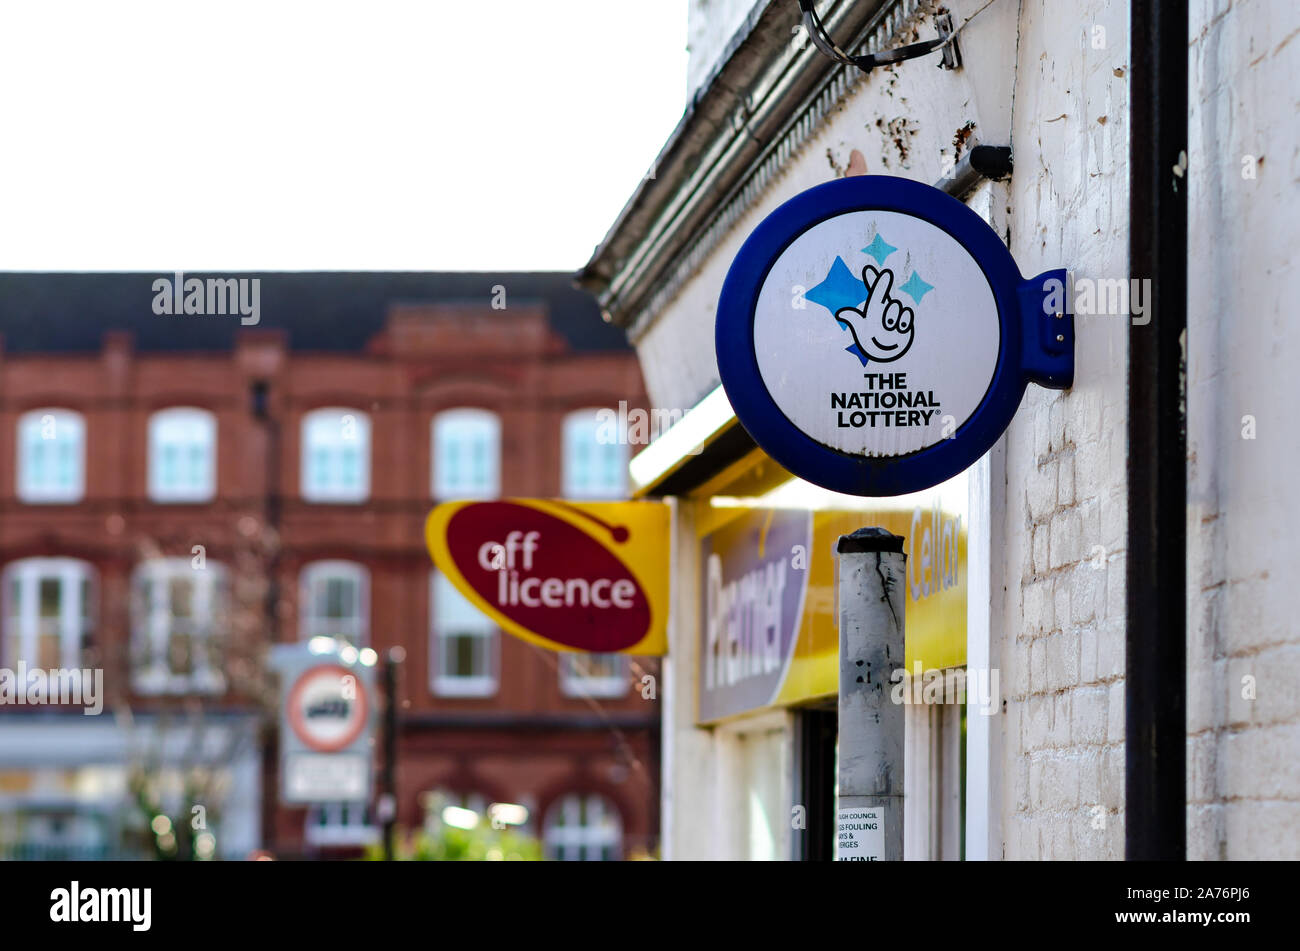 The national lottery and off license advertisement boards seen on the shop building in Stone, Staffordshire, United Kingdom. Stock Photo